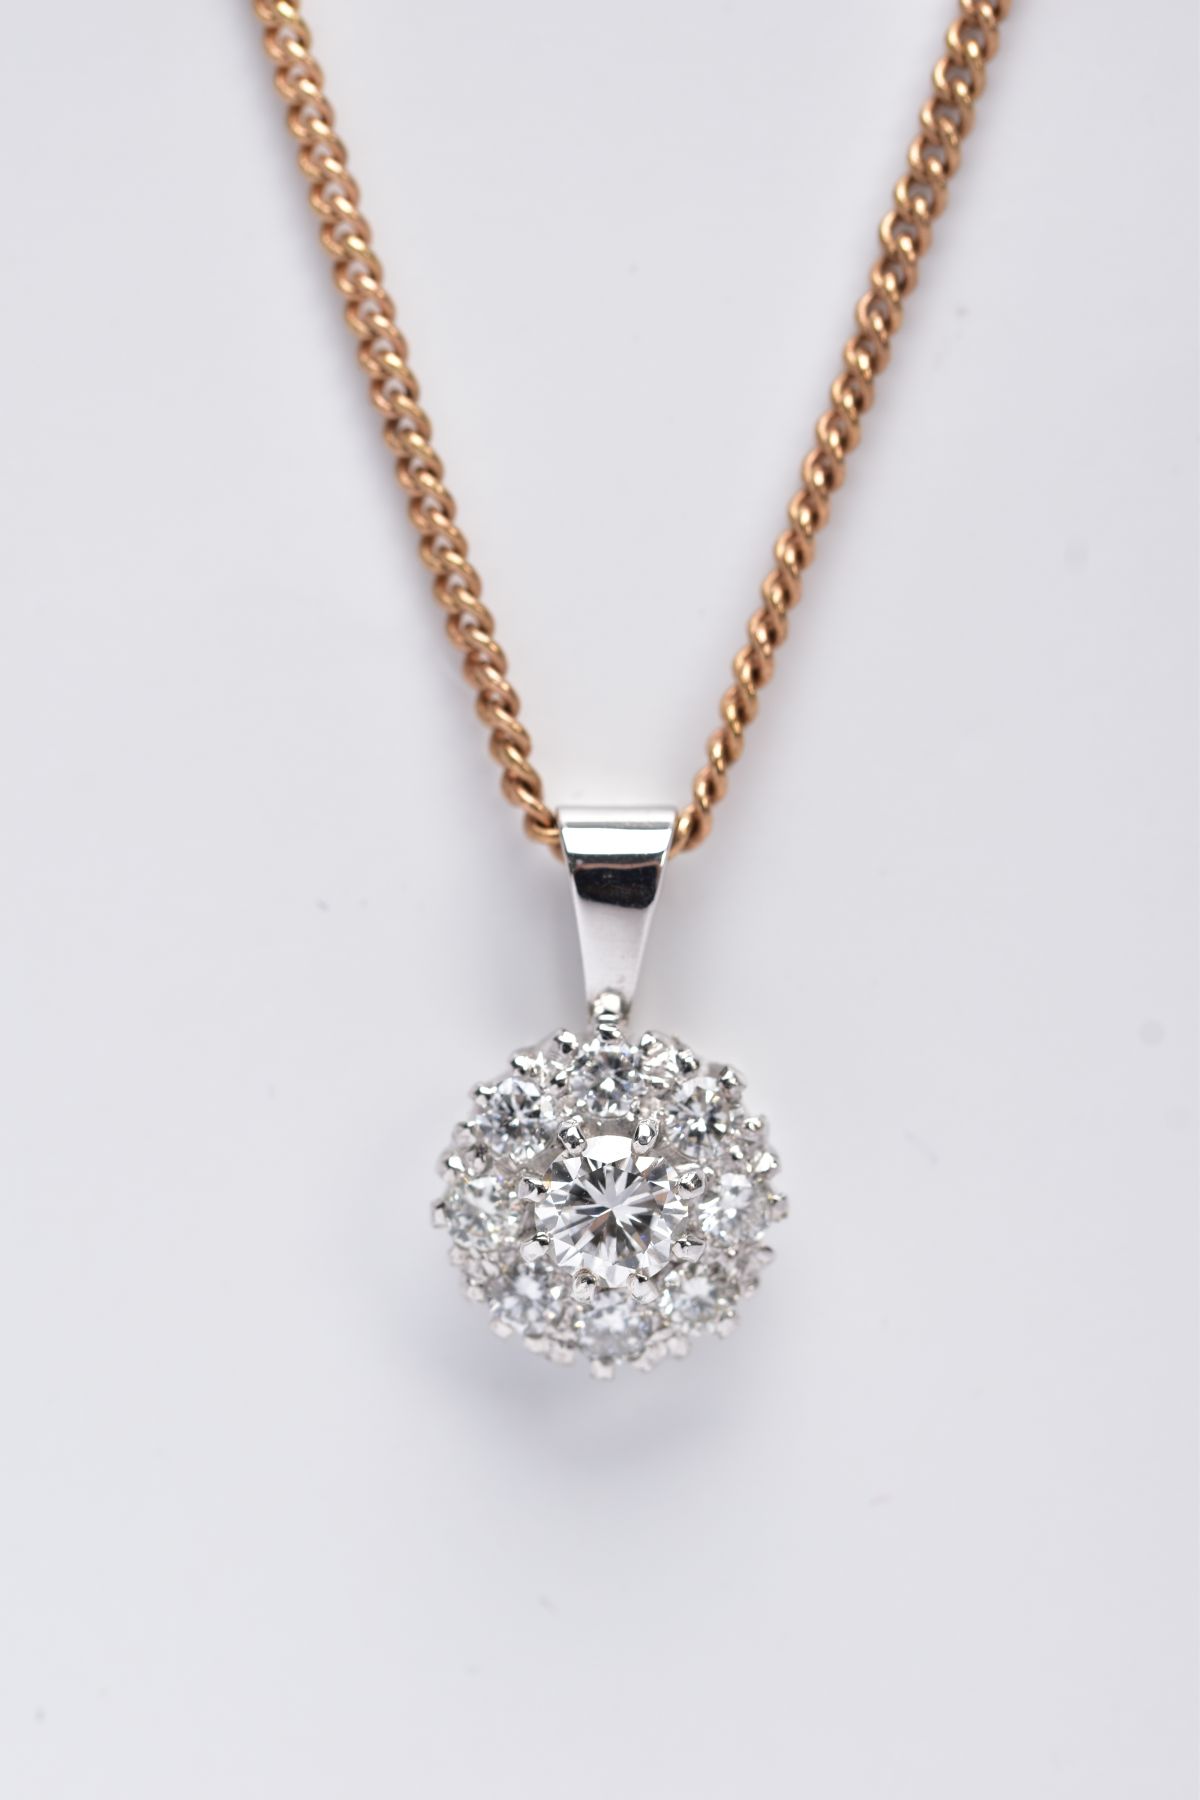 A LATE 20TH CENTURY ROUND DIAMOND CLUSTER PENDANT AND CHAIN, centring on a modern round brilliant